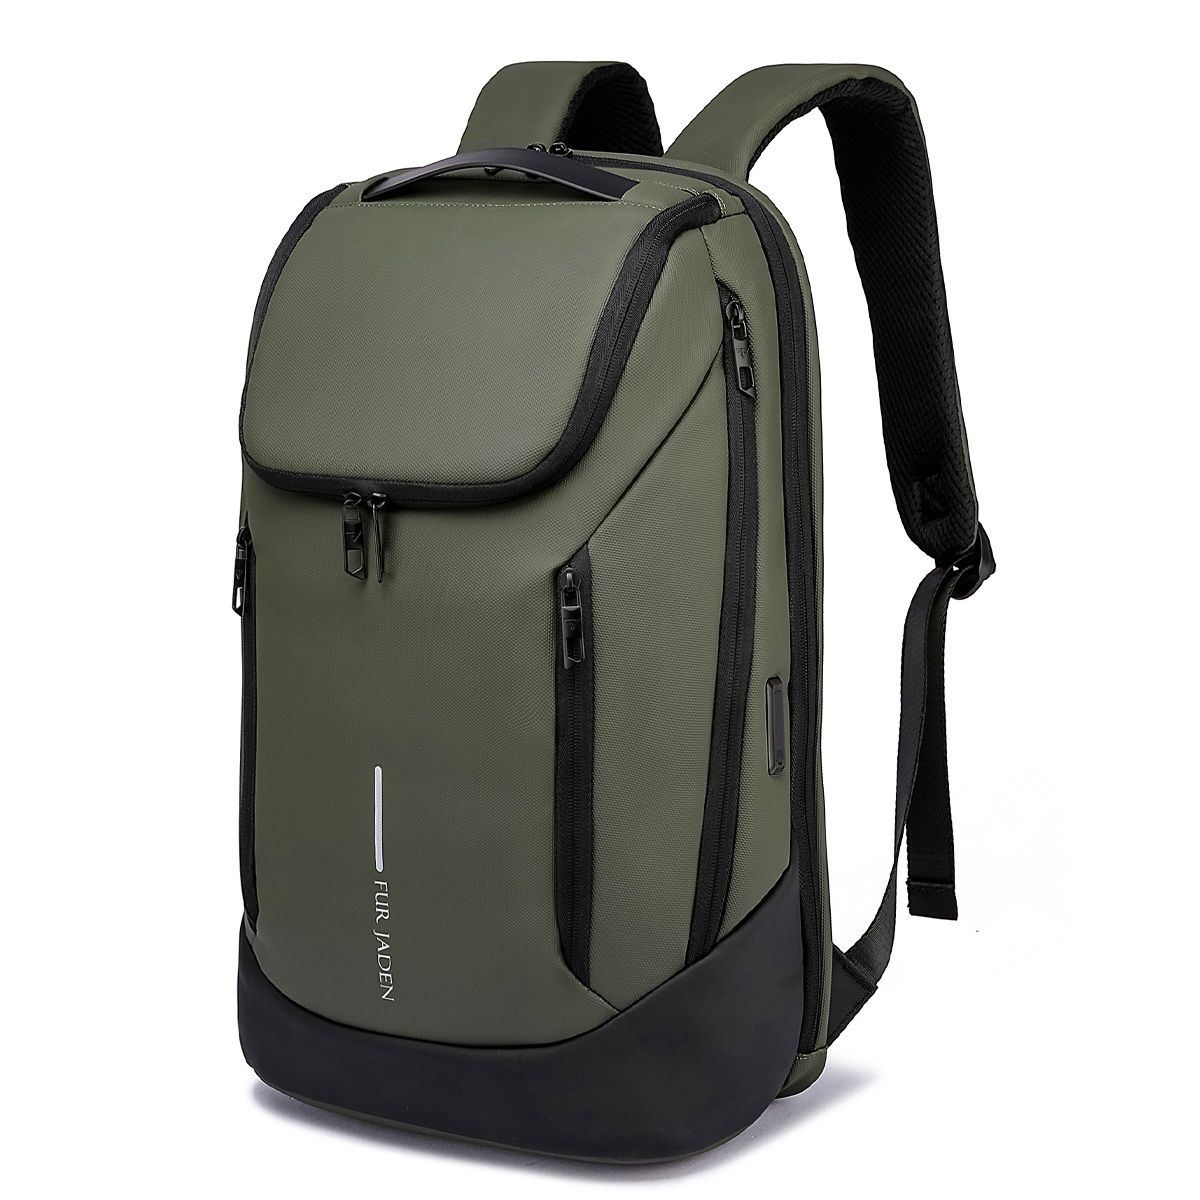 RoadGods Ghost Laptop Minimalist Anti Theft Backpack Moto Central